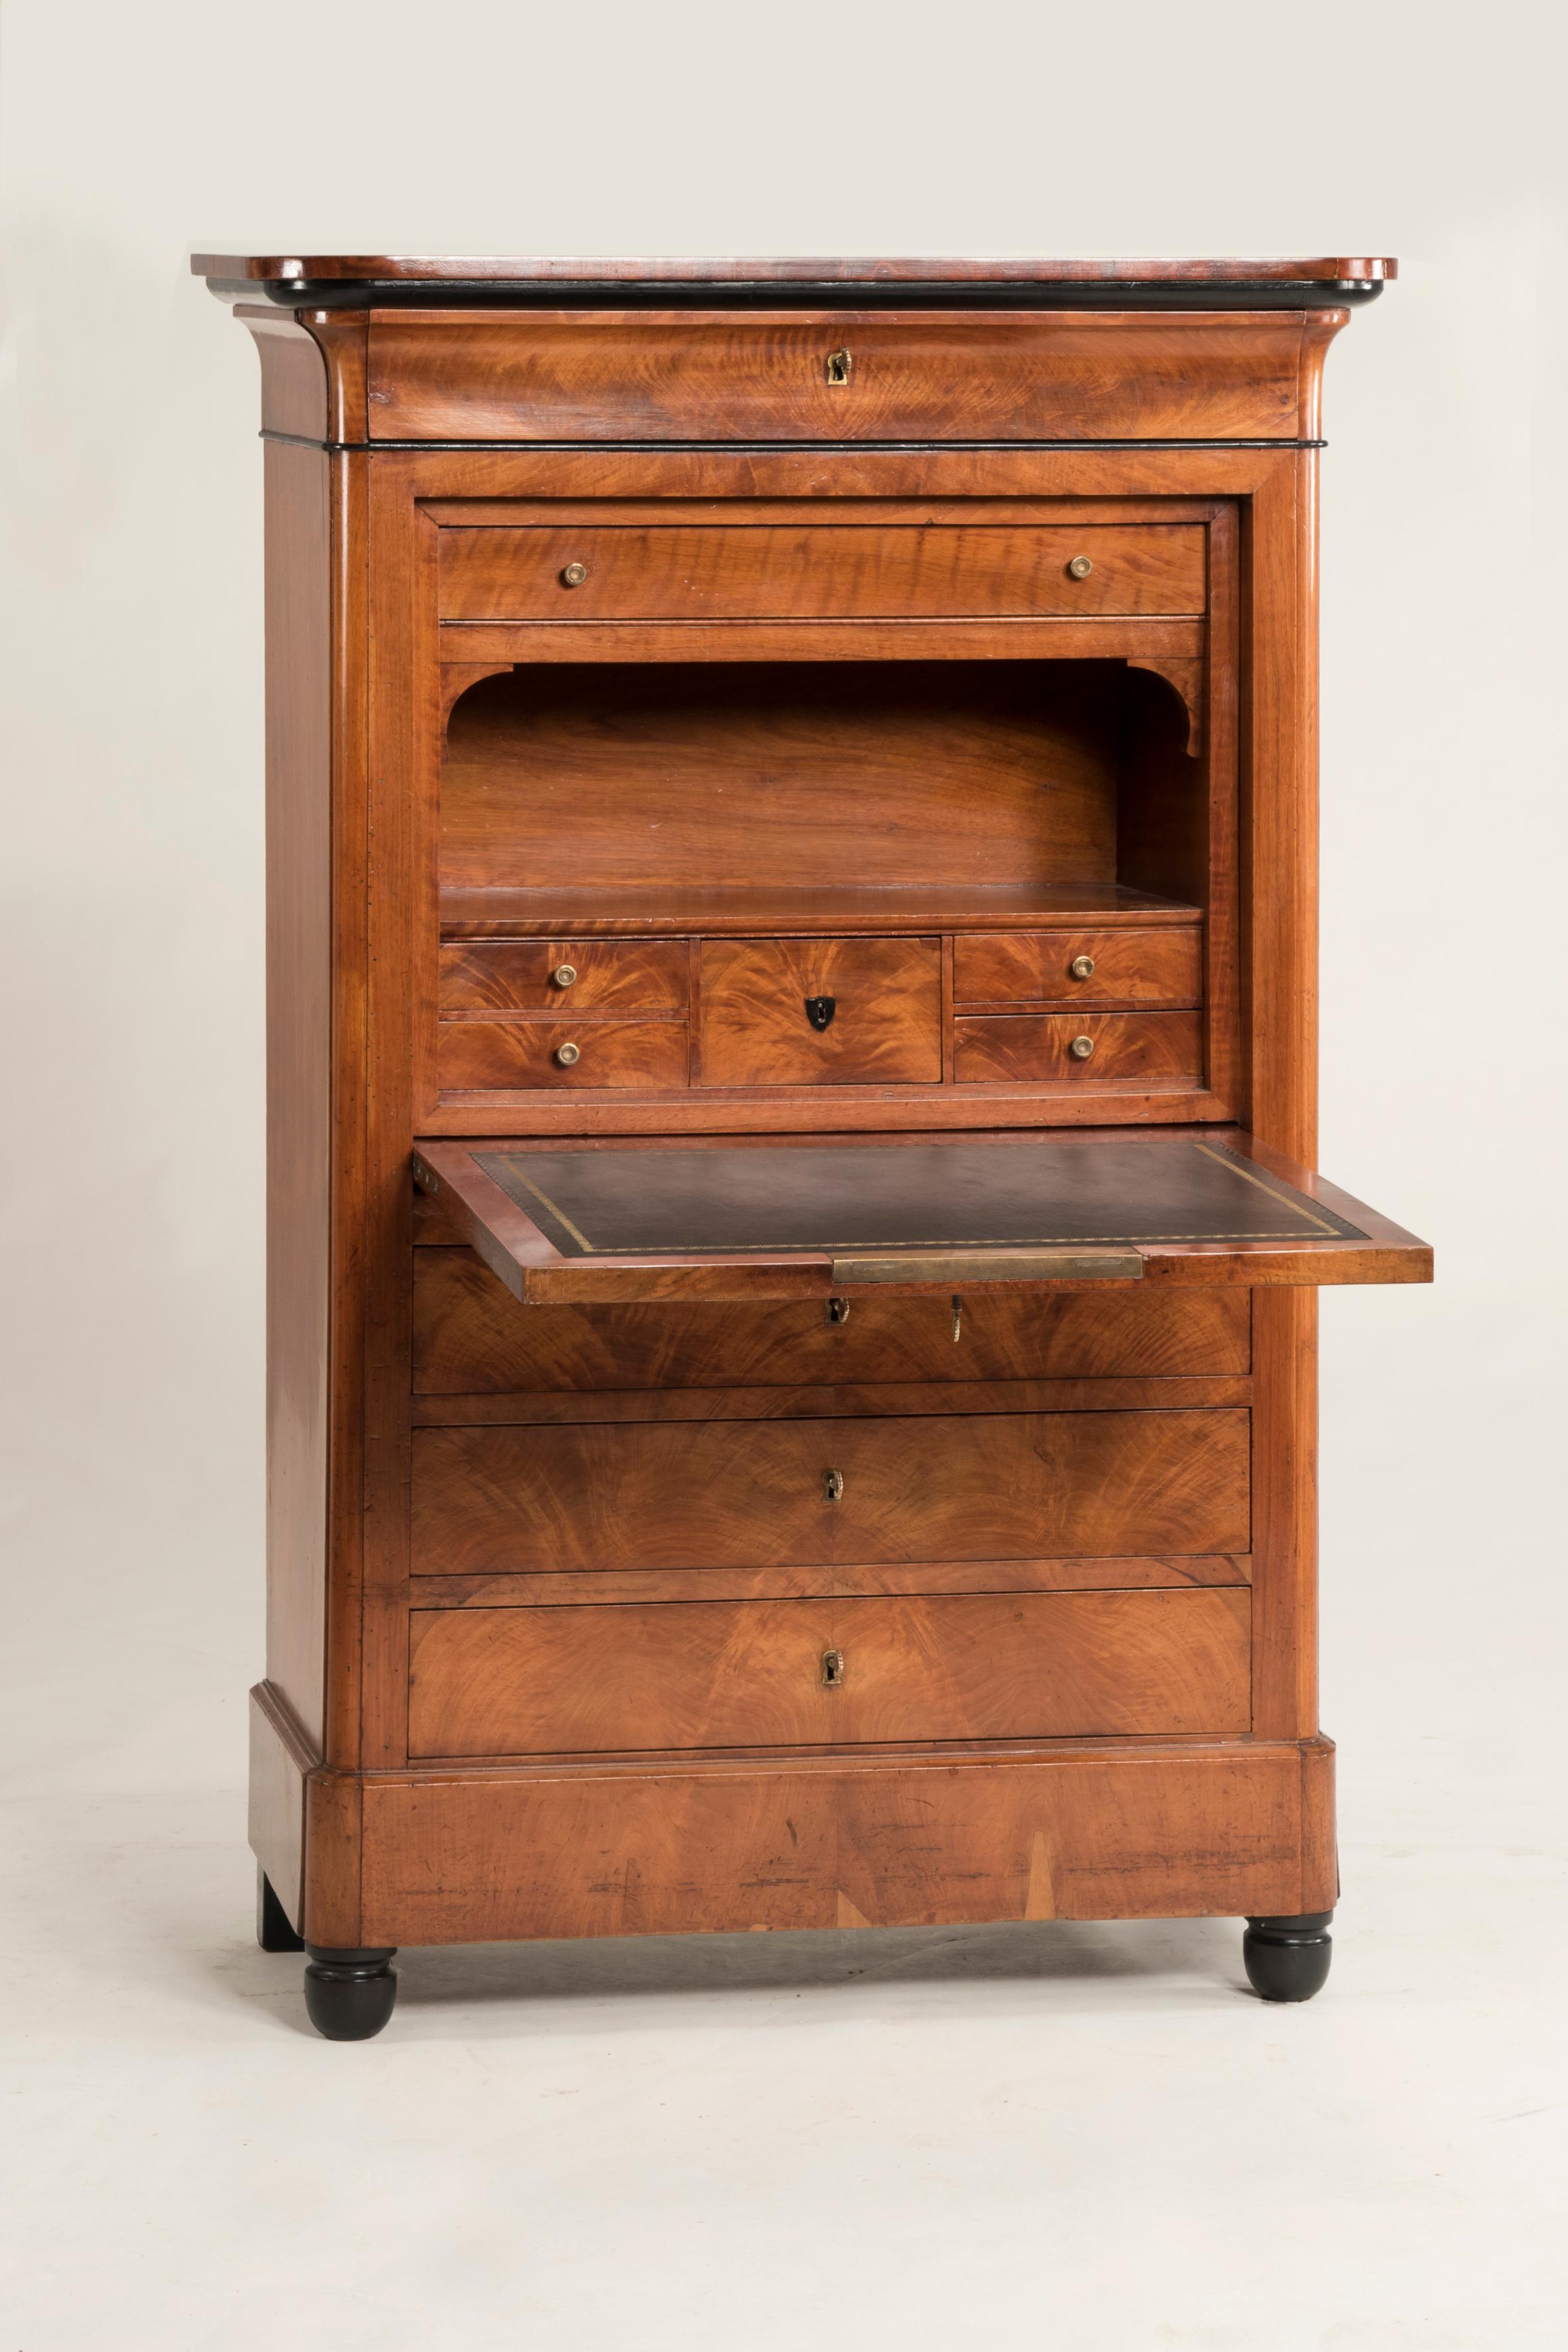 19th century Italian light mahogany cabinet folding door secretaire desk

Light mahogany cabinet secretaire from Empire period from Veneto Region, Italy. It features a folding door upon three drawers. On the top there is another drawer shaped with